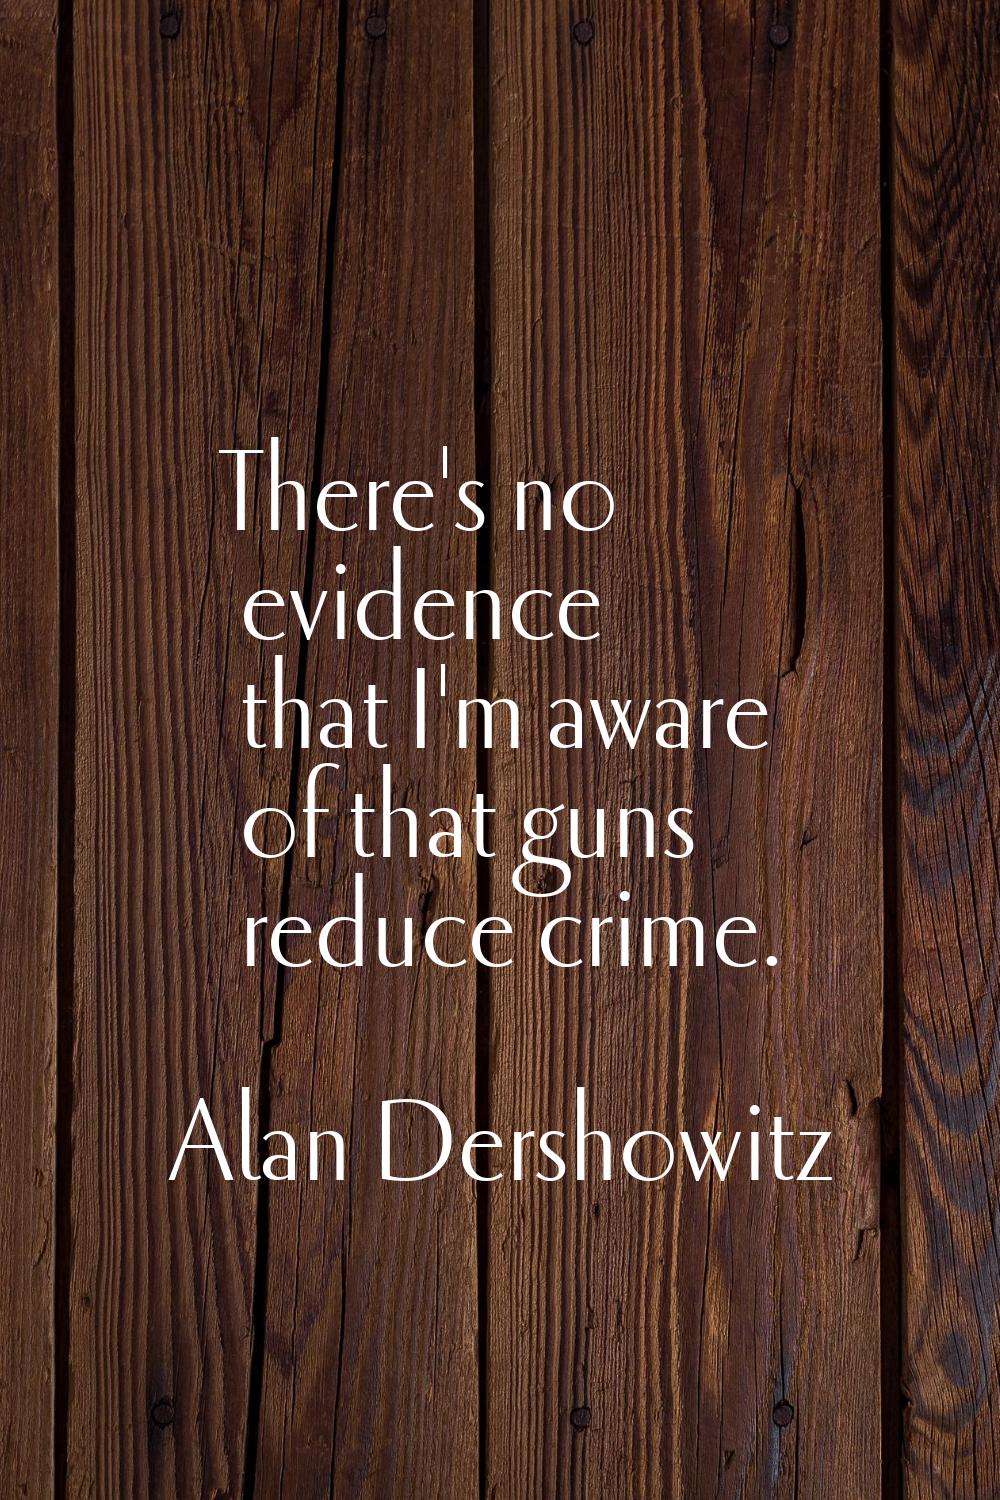 There's no evidence that I'm aware of that guns reduce crime.